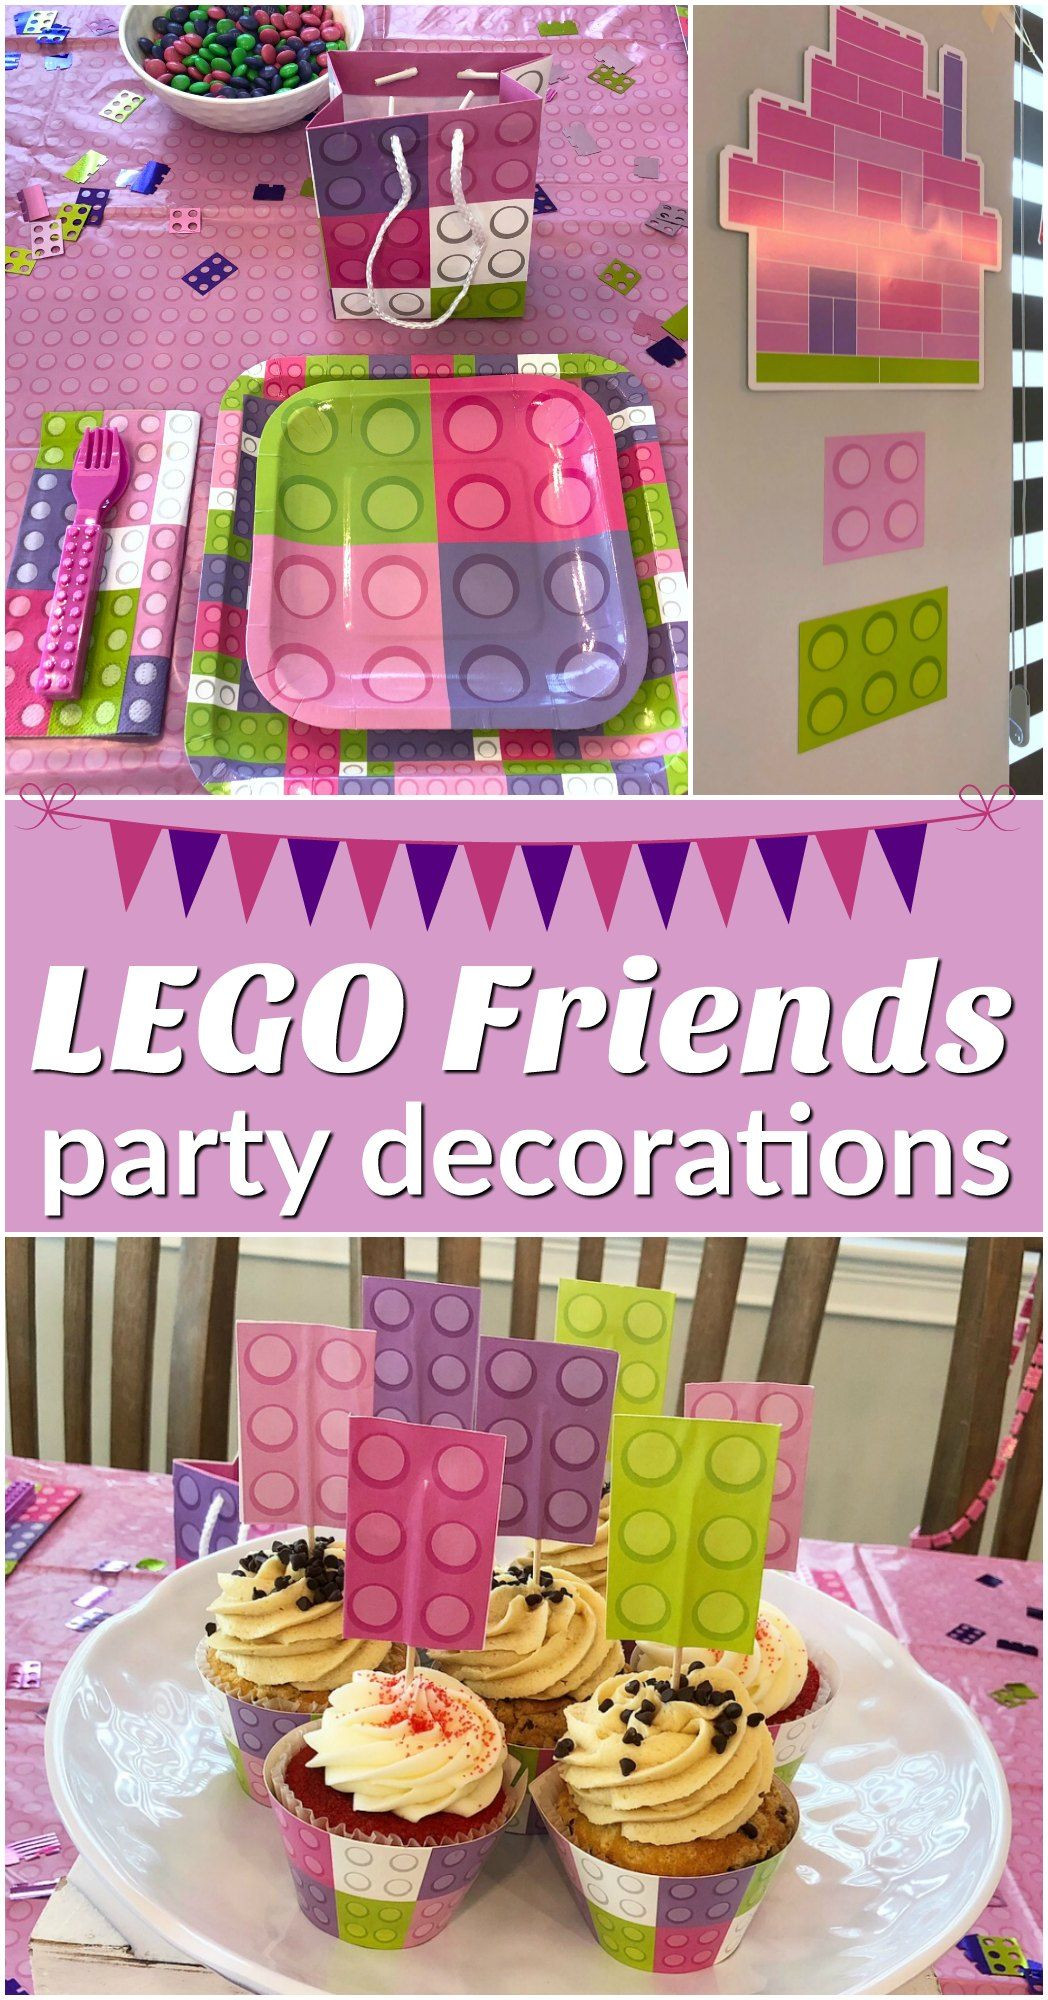 Lego Friends Birthday Party Supplies
 Lego Friends Party Decorations